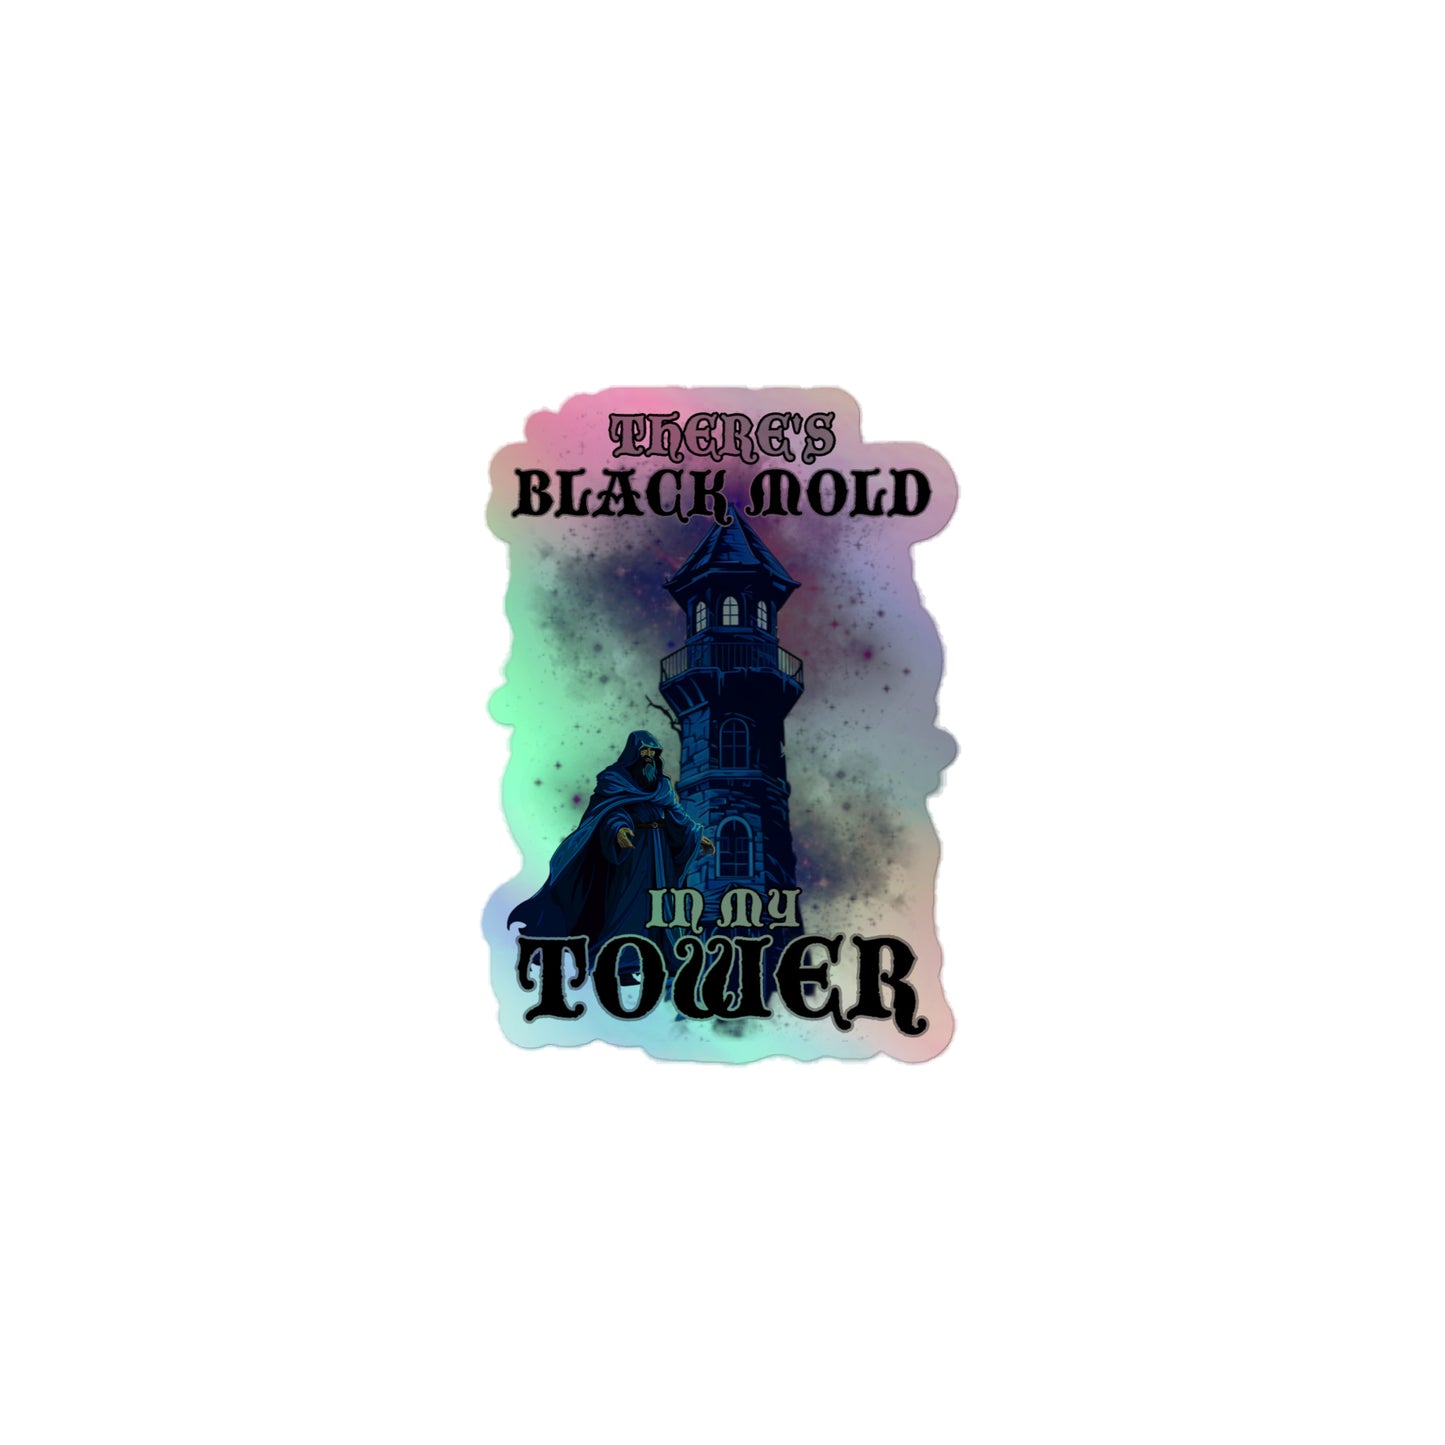 There's black mold in my tower (sticker)